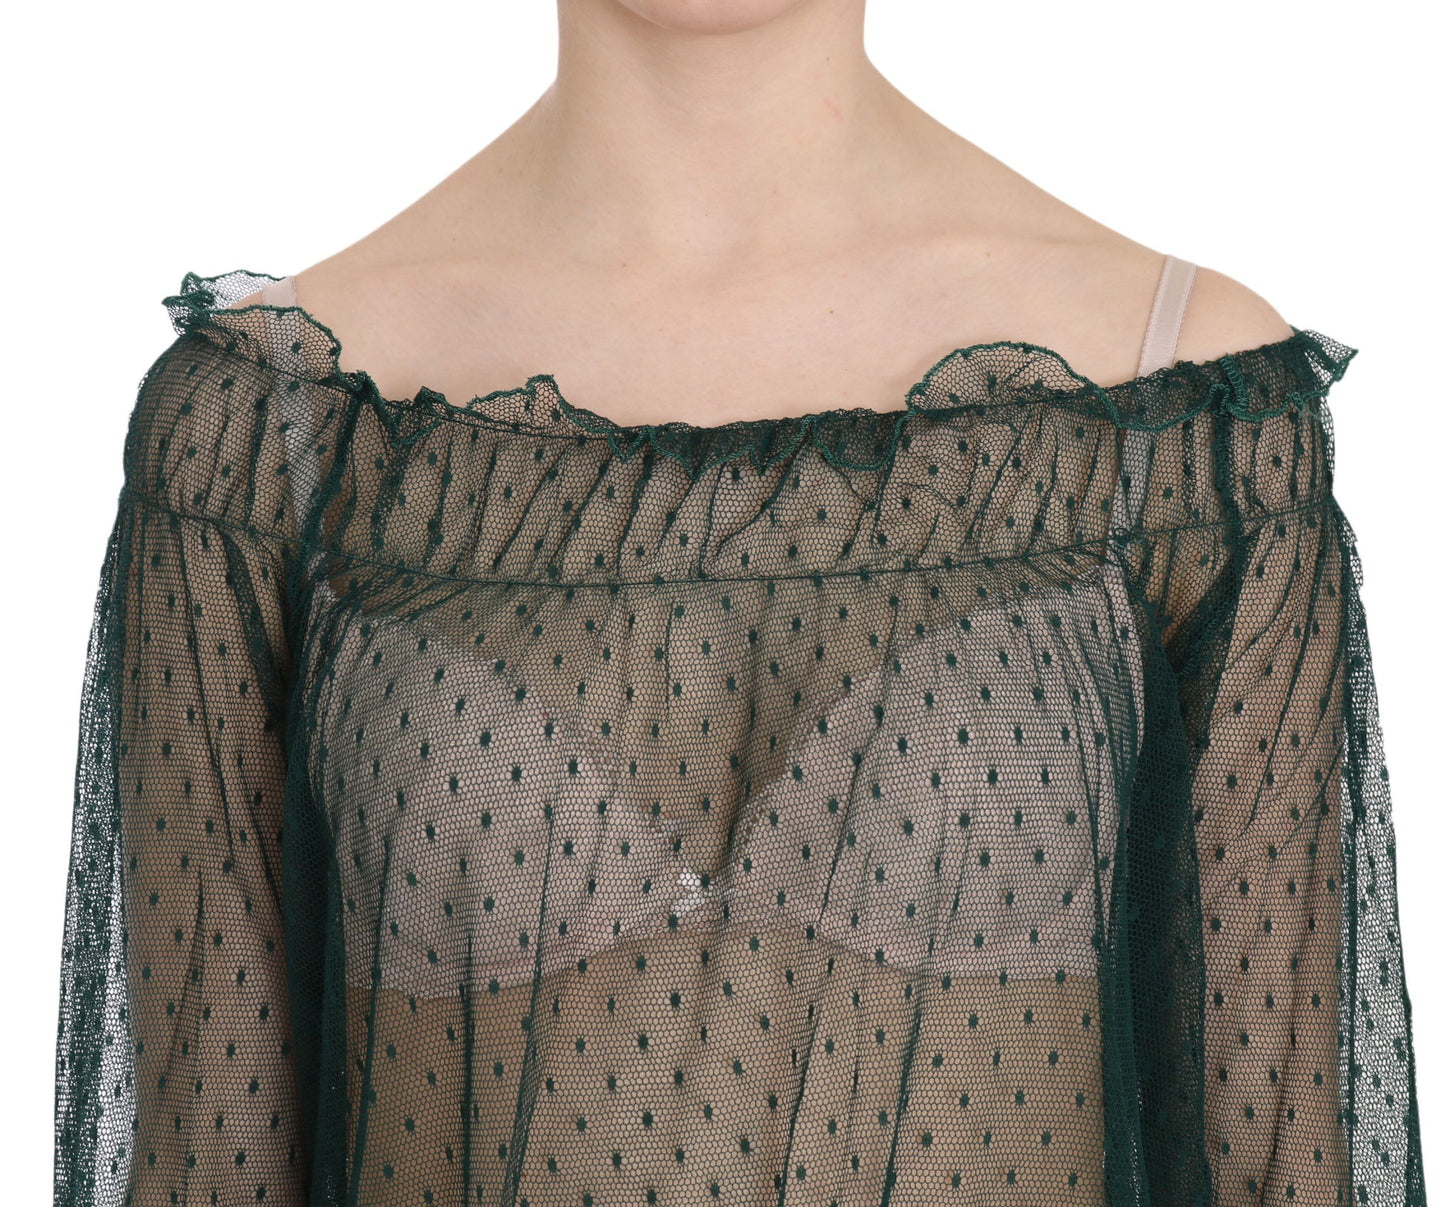 Green Mesh See Through Long Sleeve Top Blouse - Designed by PINK MEMORIES Available to Buy at a Discounted Price on Moon Behind The Hill Online Designer Discount Store